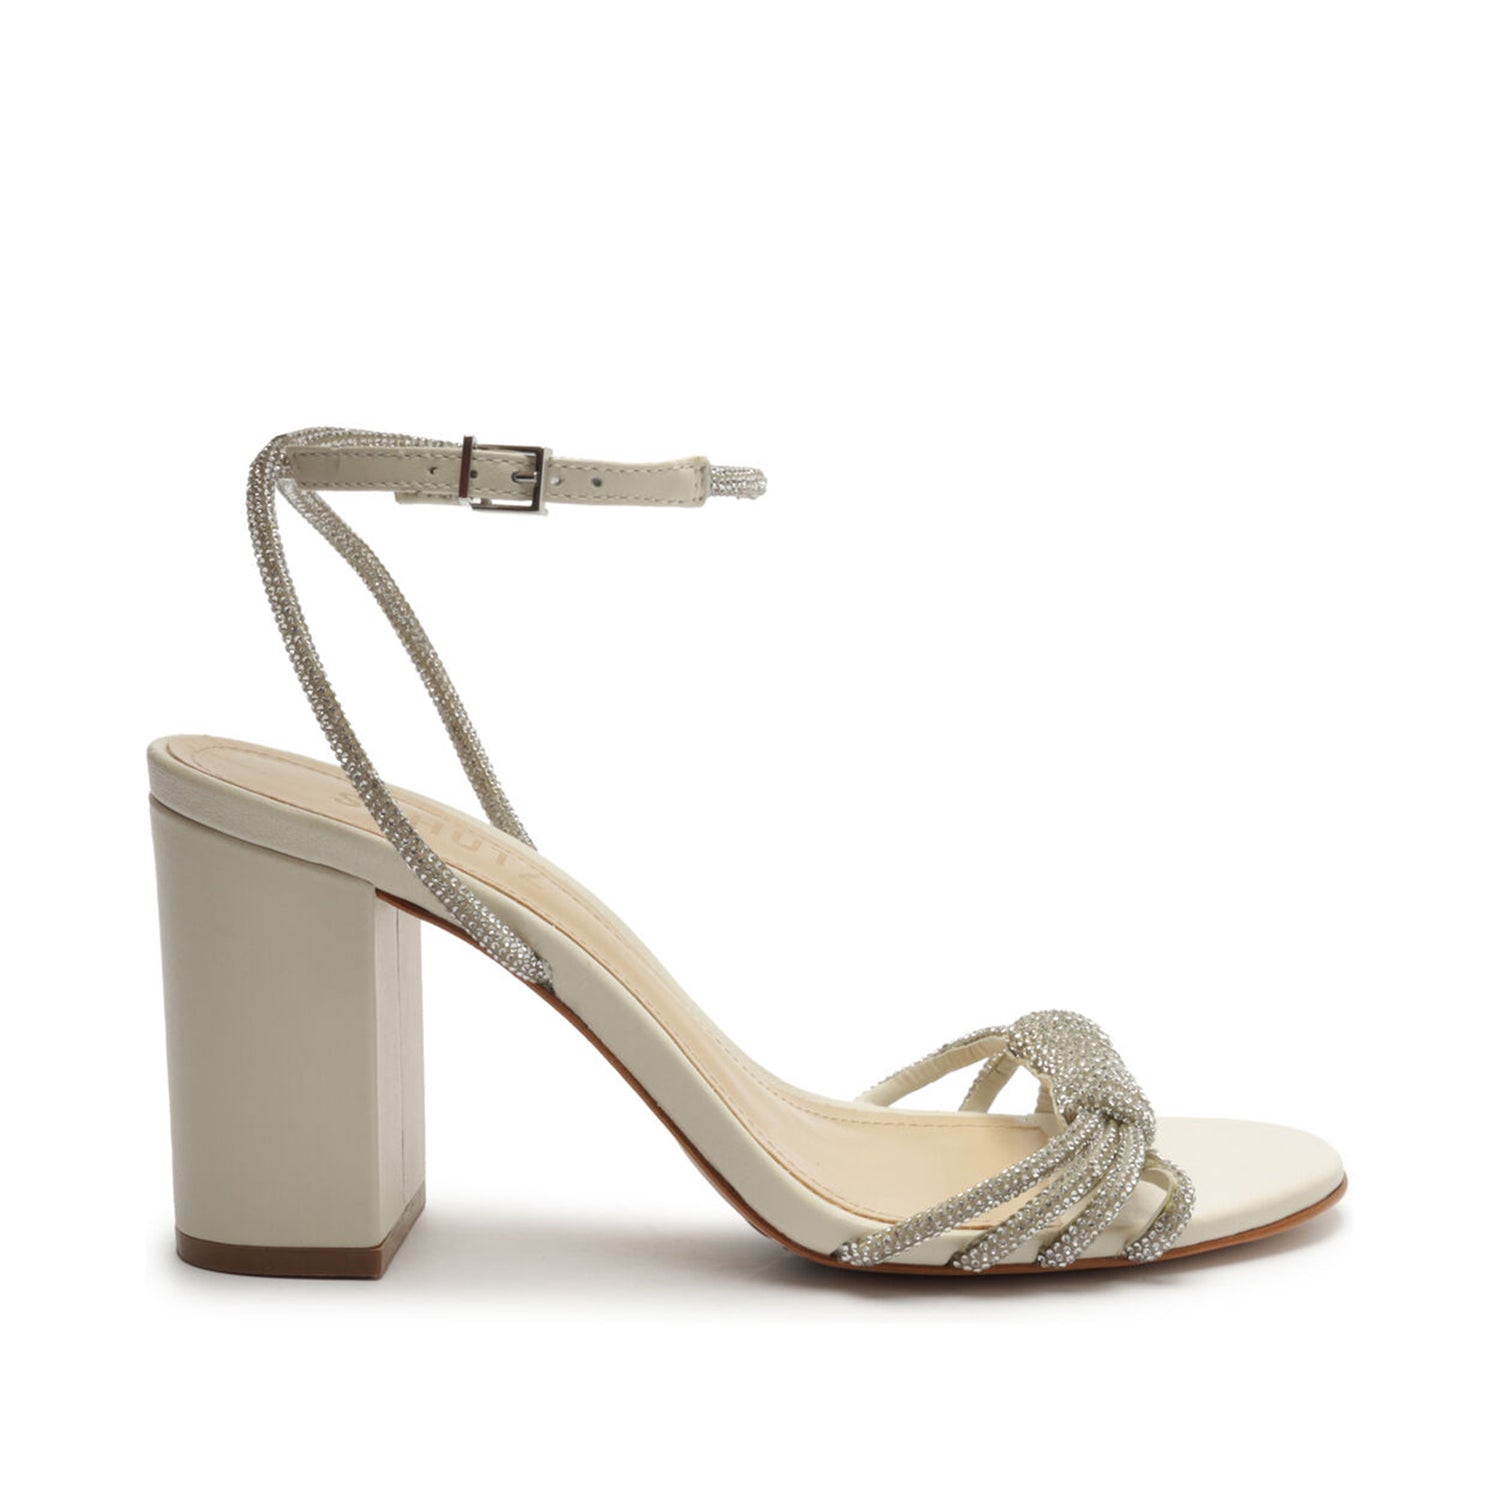 Jewell Block Nappa Leather Sandal Sandals FALL 23 5 Crystal Nappa Leather - Schutz Shoes